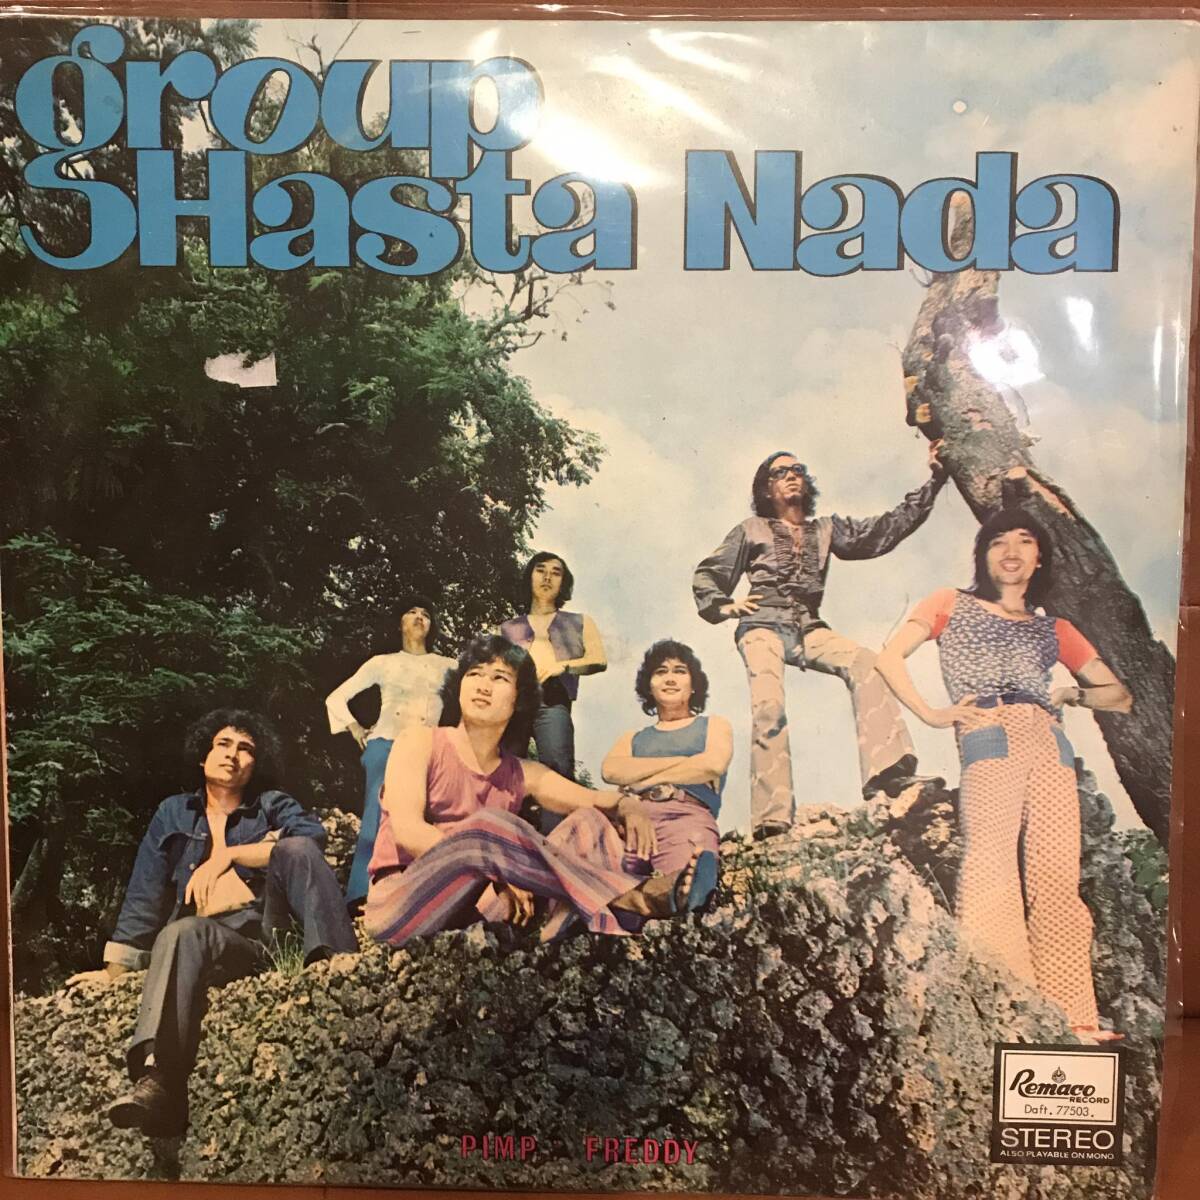 LP Indonesia[ Group Hasta Nada ] Indonesia Tropical Funky Soul Garage Psych south .Pop 70\'s illusion rare record popular band 